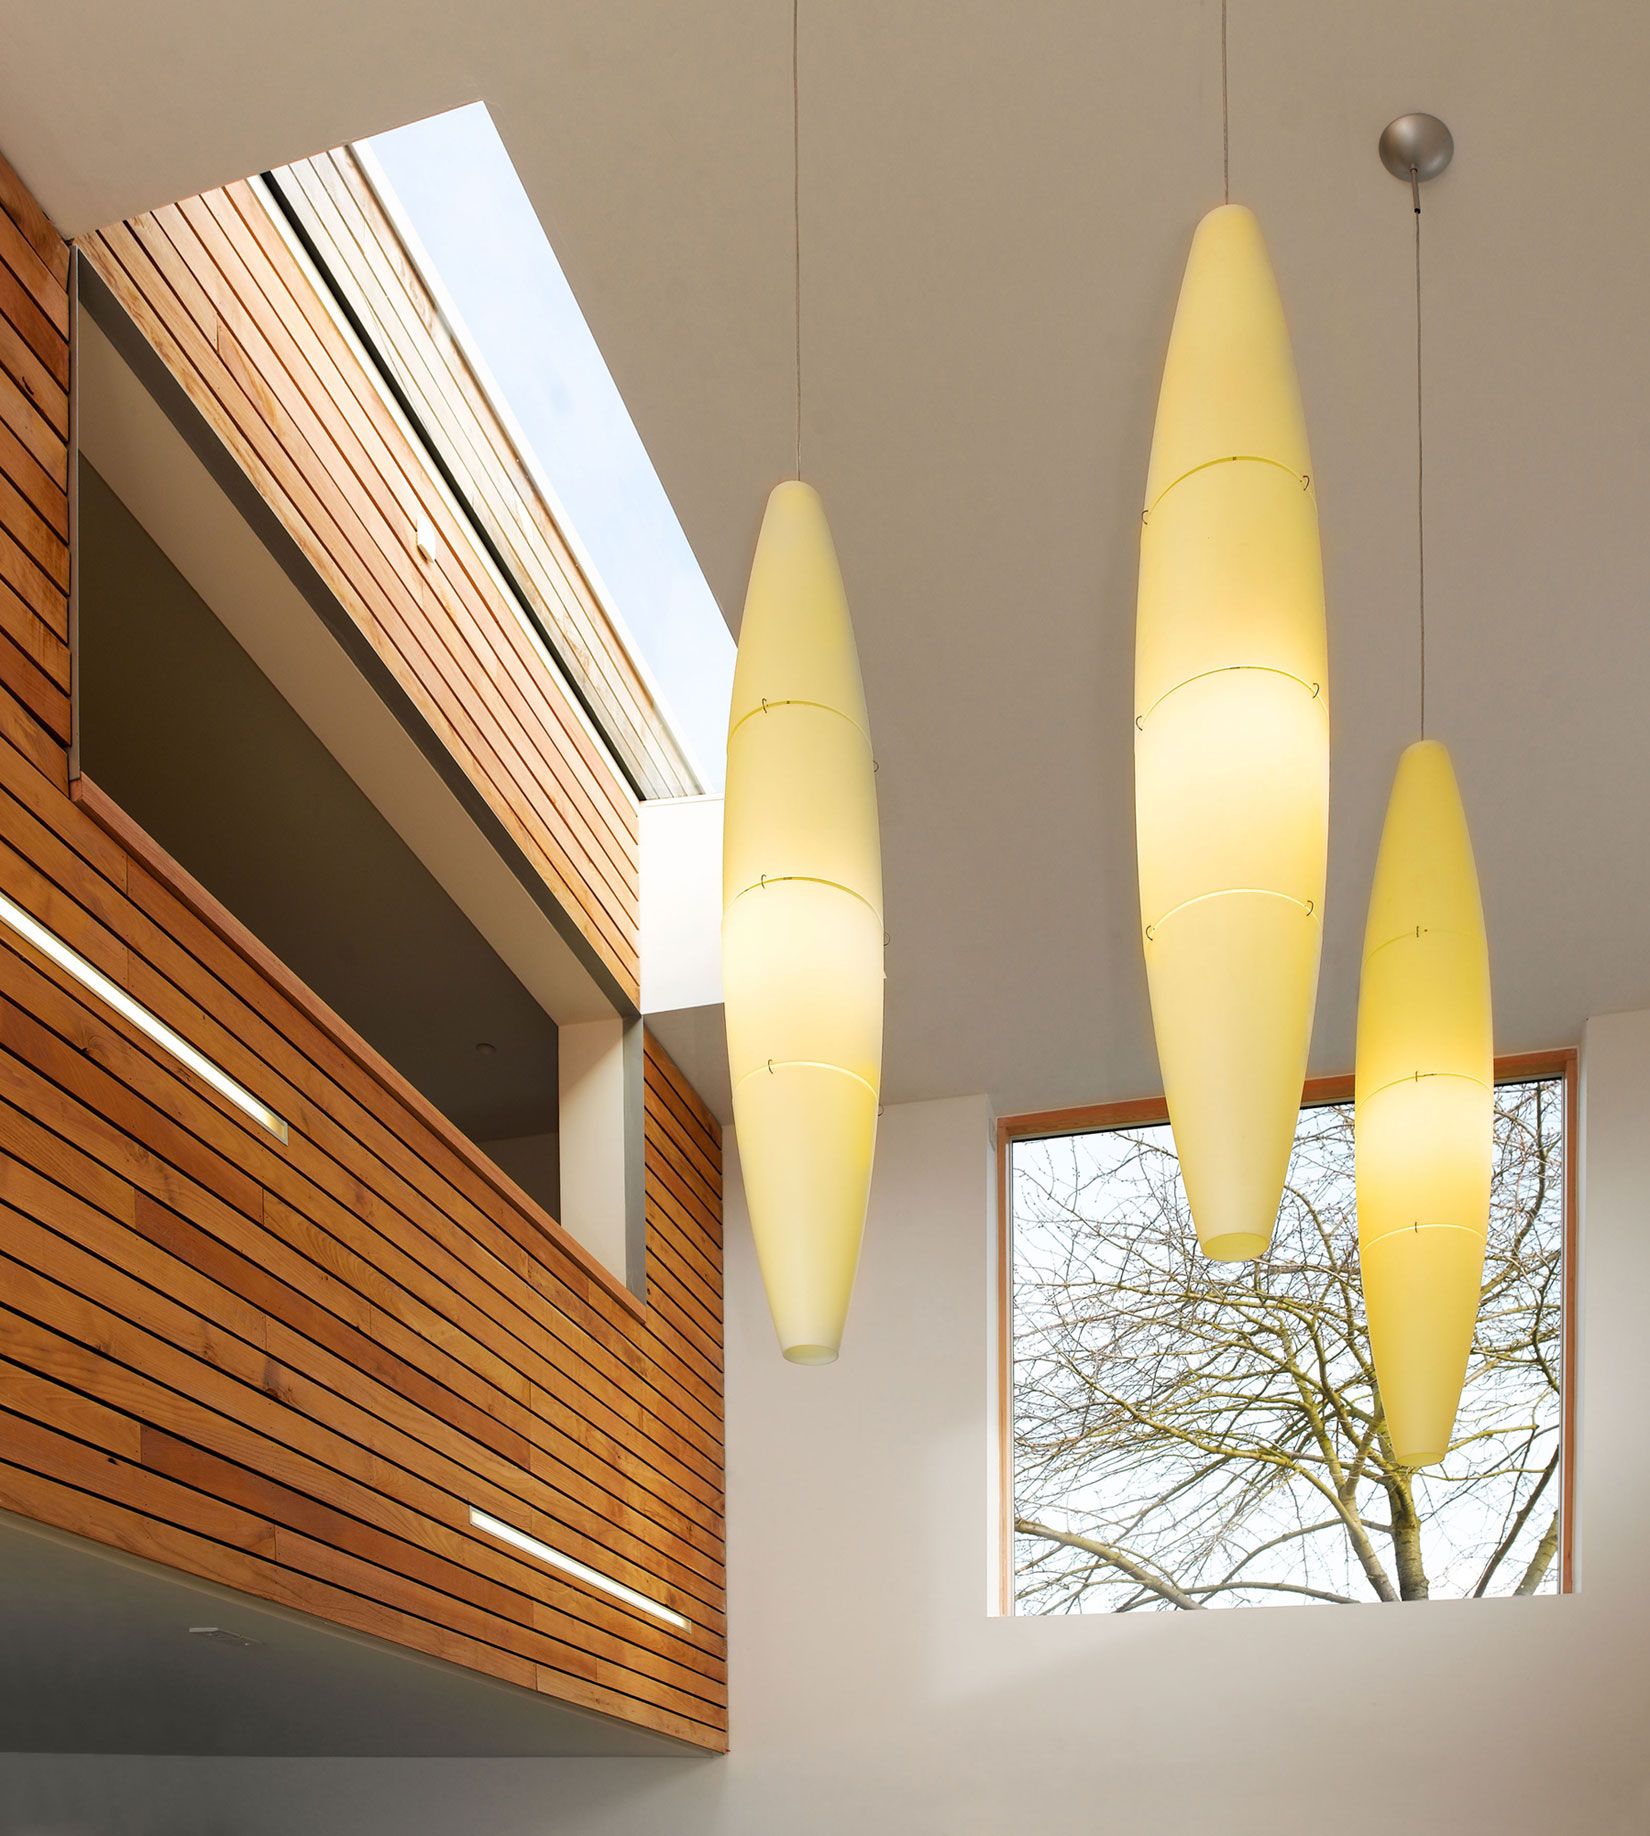 Uique Pendant Wood Yellow Unique Pendant Lamp With Wood Wall Cladding Interior Family Rustic House Design Ideas Architecture Captivating Rustic Family Home Designed For A Retired Couple